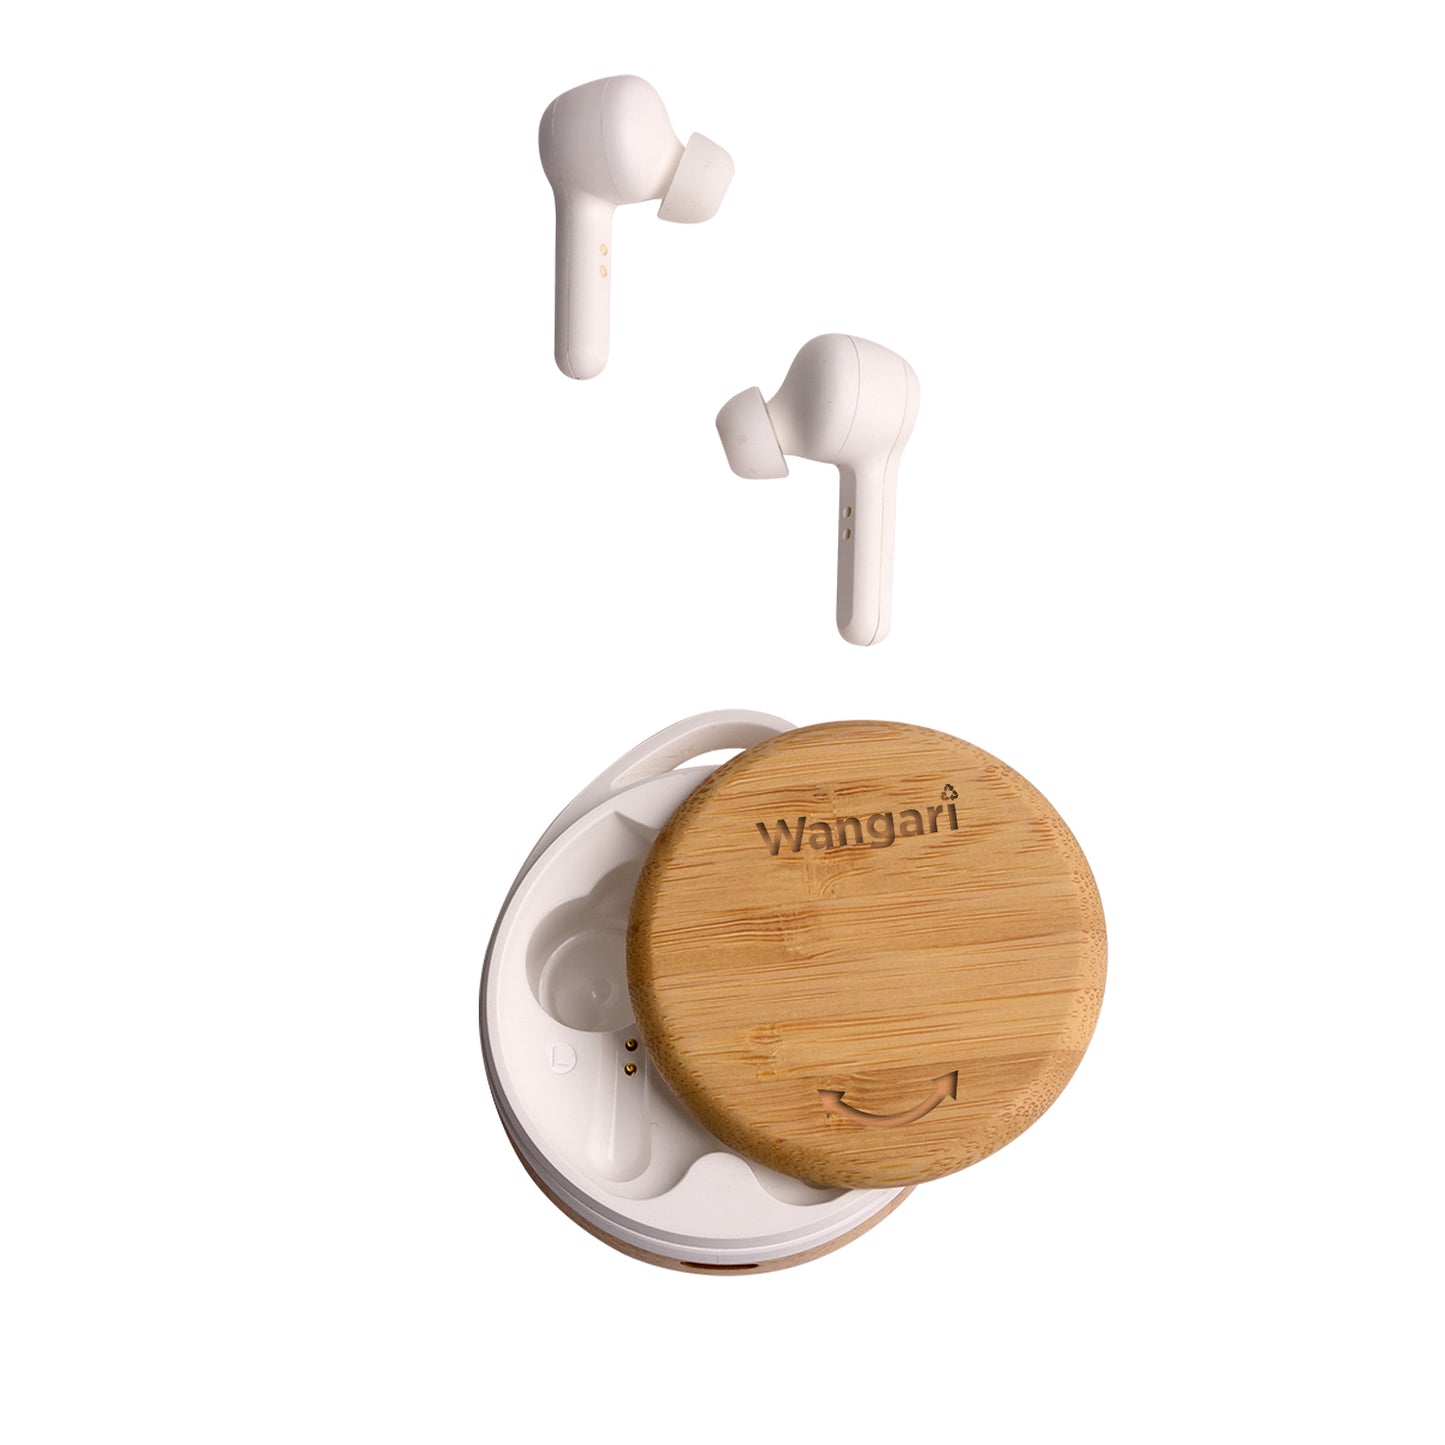 Personalized Bamboo Wireless Earbuds - For Corporate Gifting, Event Gifting, Stakeholder Gifting, Freebies, Promotions, Return Gift - HKWAE9001